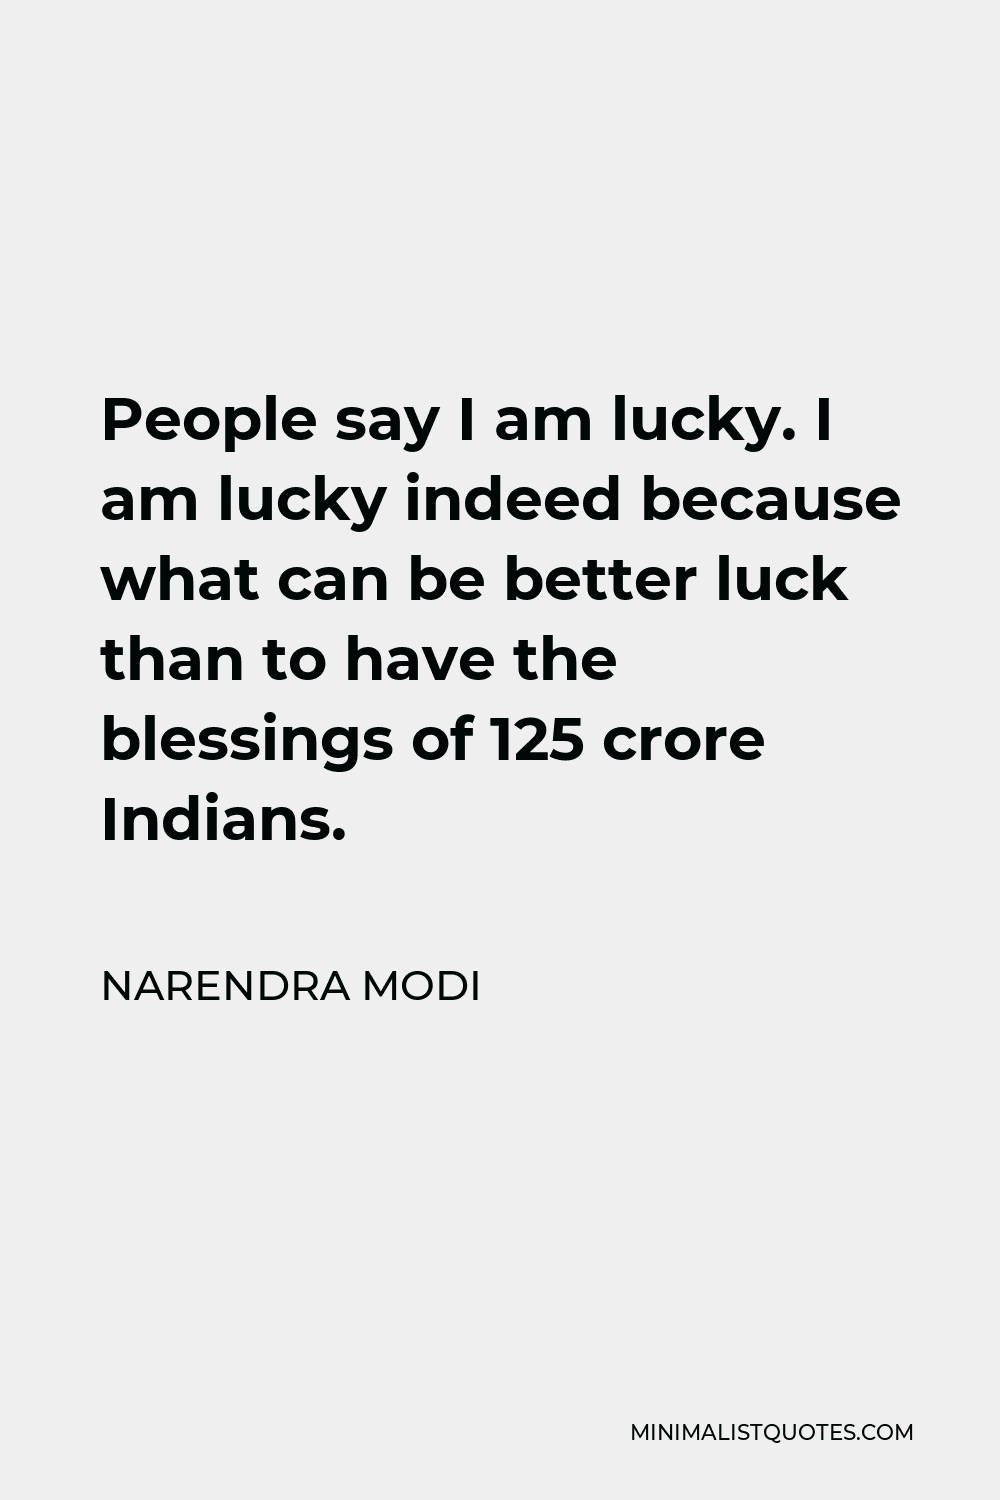 Narendra Modi Quote - People say I am lucky. I am lucky indeed because what can be better luck than to have the blessings of 125 crore Indians.